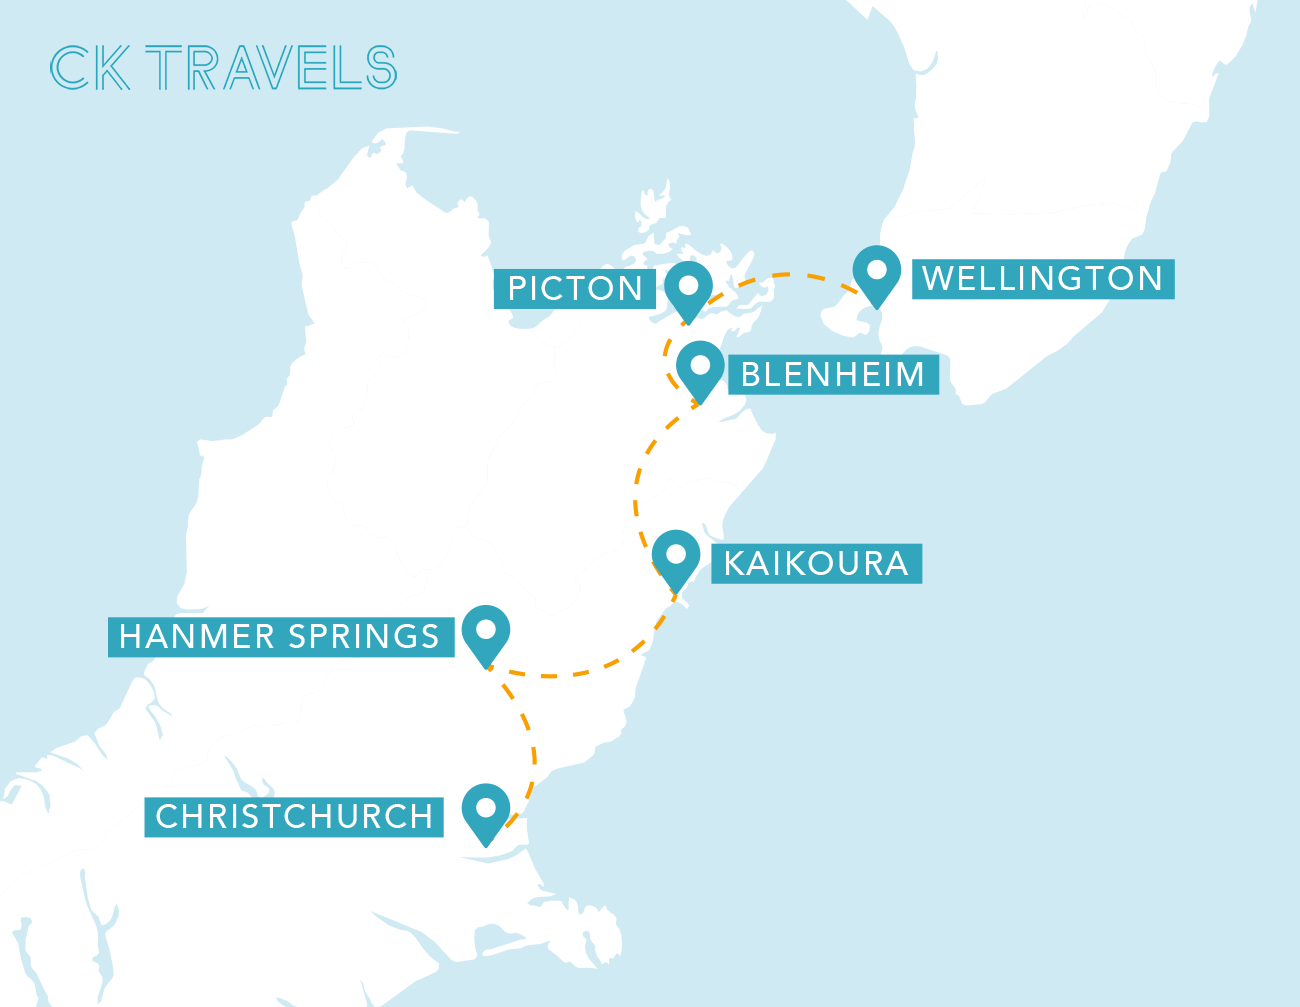 Wellington to Christchurch road trip - 7 day / 1 week itinerary